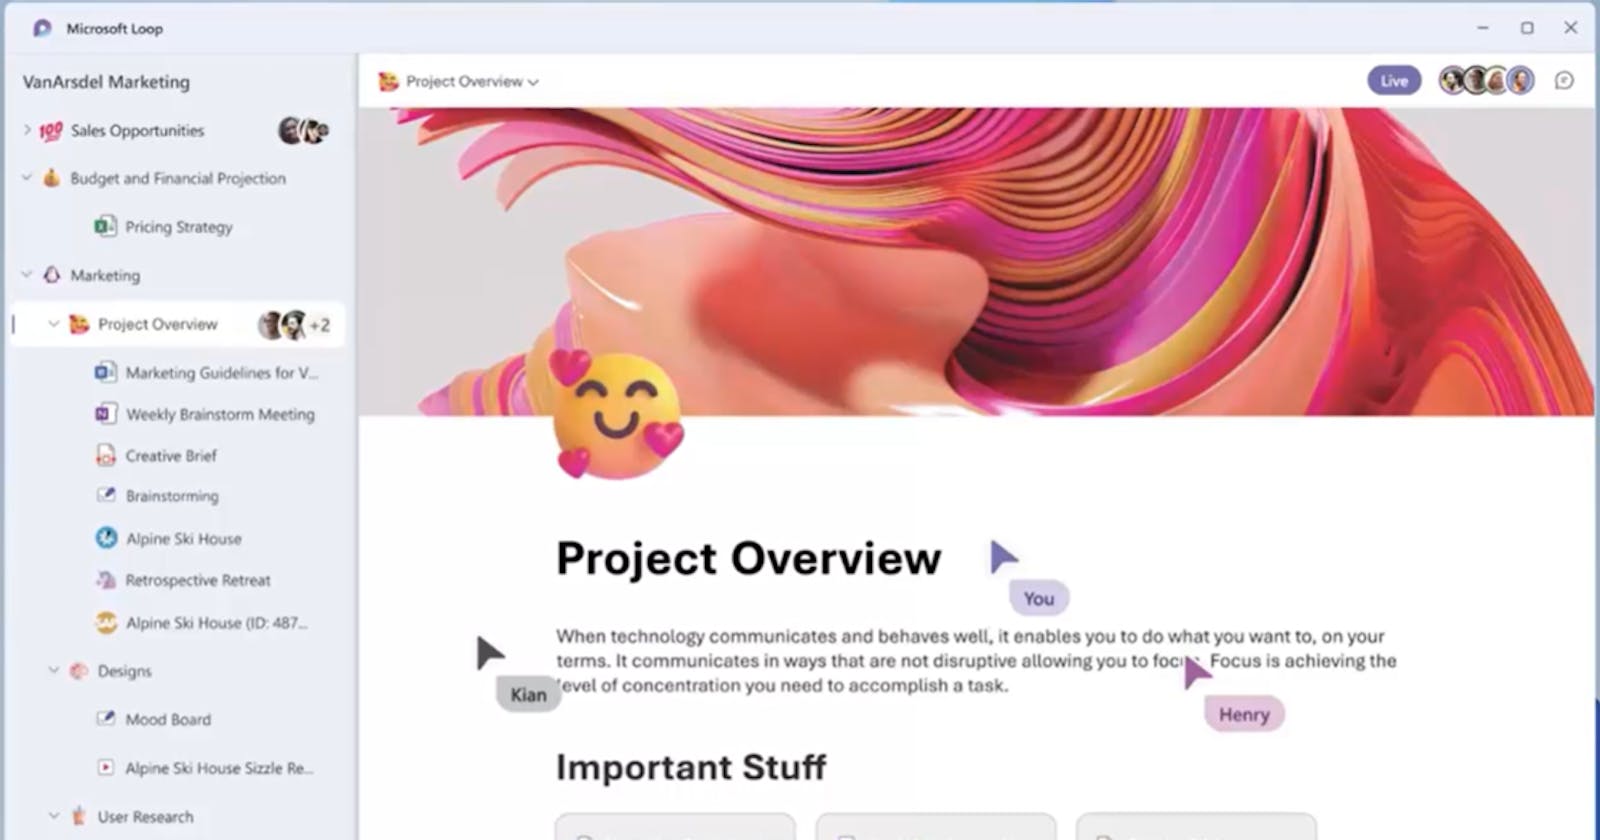 Microsoft Loop New Product in Office 365 - Looks stunning